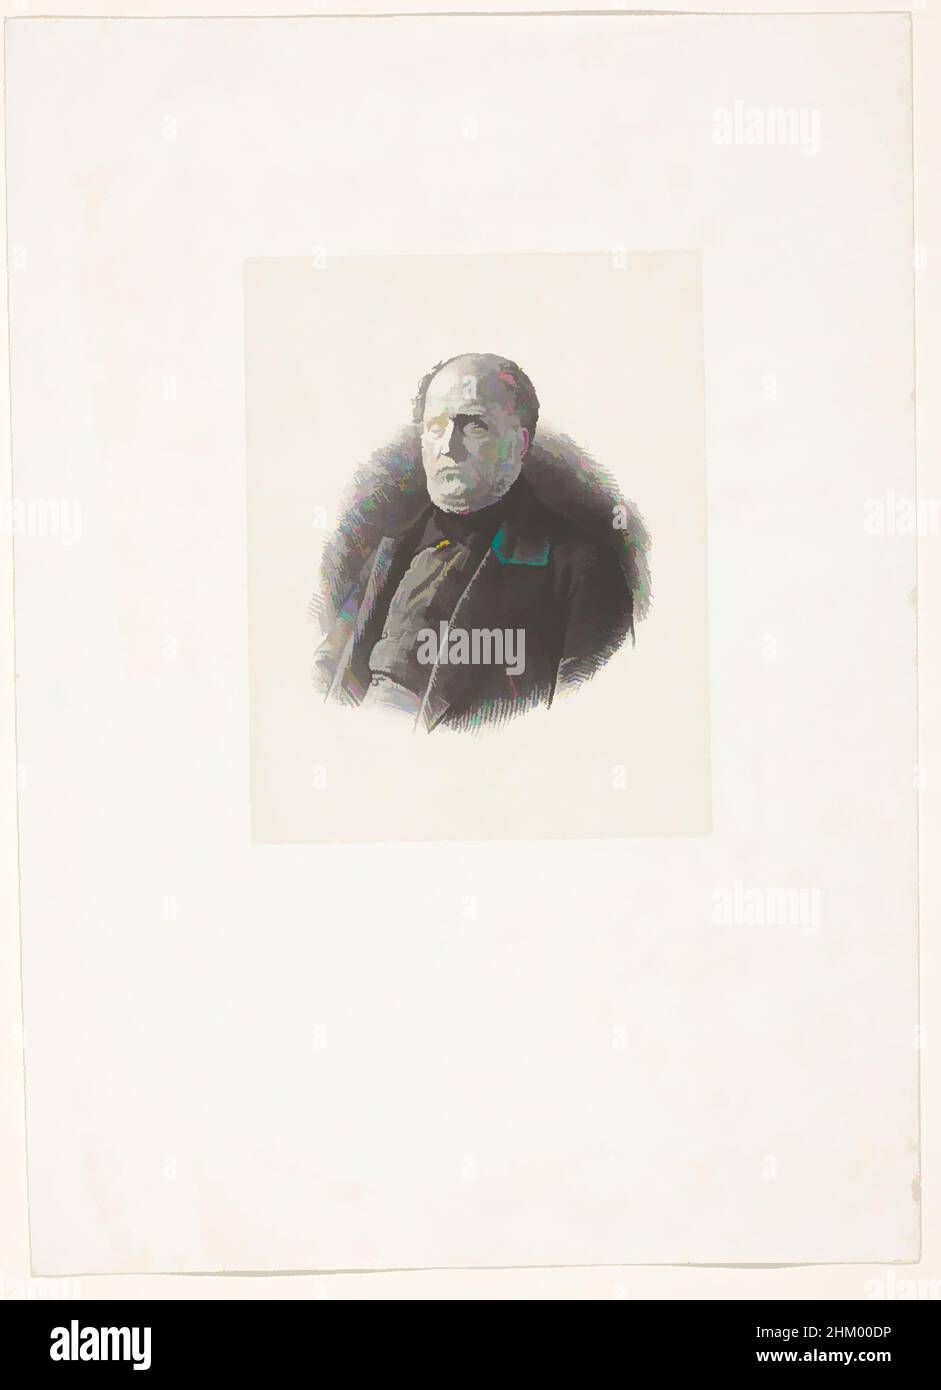 Art inspired by Portrait of Honoré Théodoric d'Albert de Luynes, Members of the National Assembly: representatives of the people (series title), Assemblée Nationale. Galerie des représentants du peuple (1848) ., print maker: Jean-Baptiste Adolphe Lafosse, Jean-Baptiste Adolphe Lafosse, Classic works modernized by Artotop with a splash of modernity. Shapes, color and value, eye-catching visual impact on art. Emotions through freedom of artworks in a contemporary way. A timeless message pursuing a wildly creative new direction. Artists turning to the digital medium and creating the Artotop NFT Stock Photo